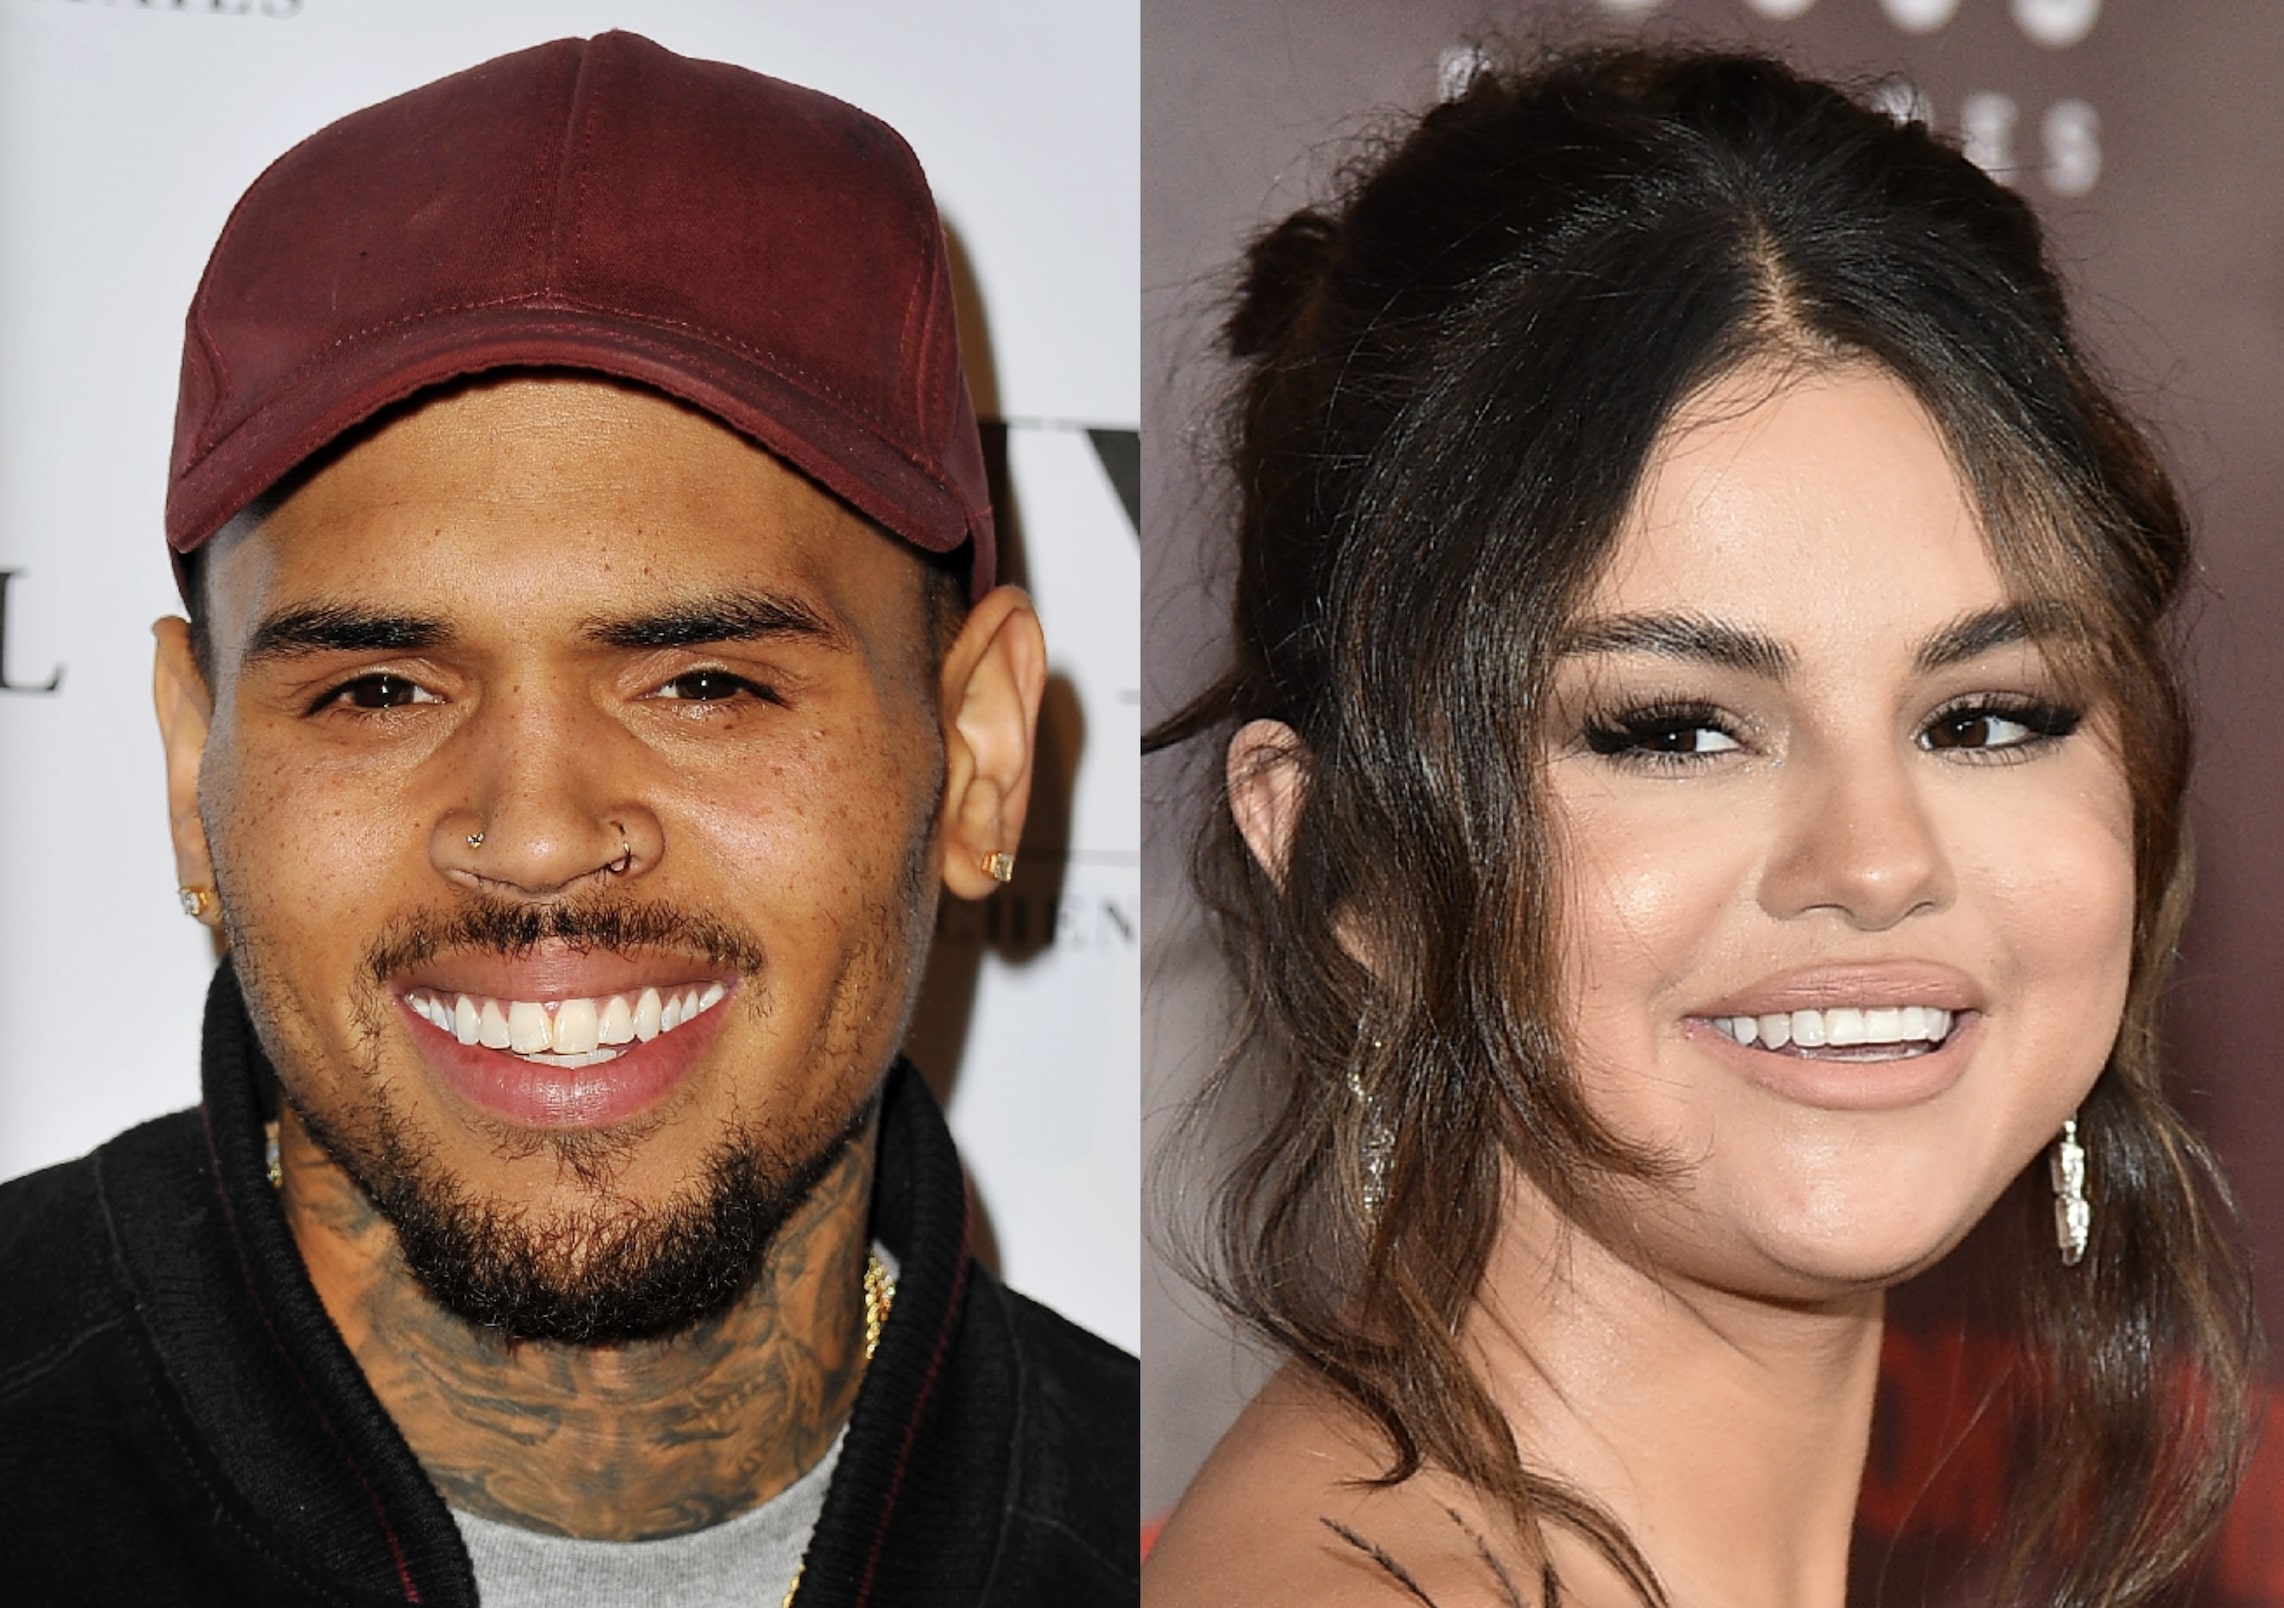 Chris Brown Shares Telling Message After Selena Gomez VMAs Drama